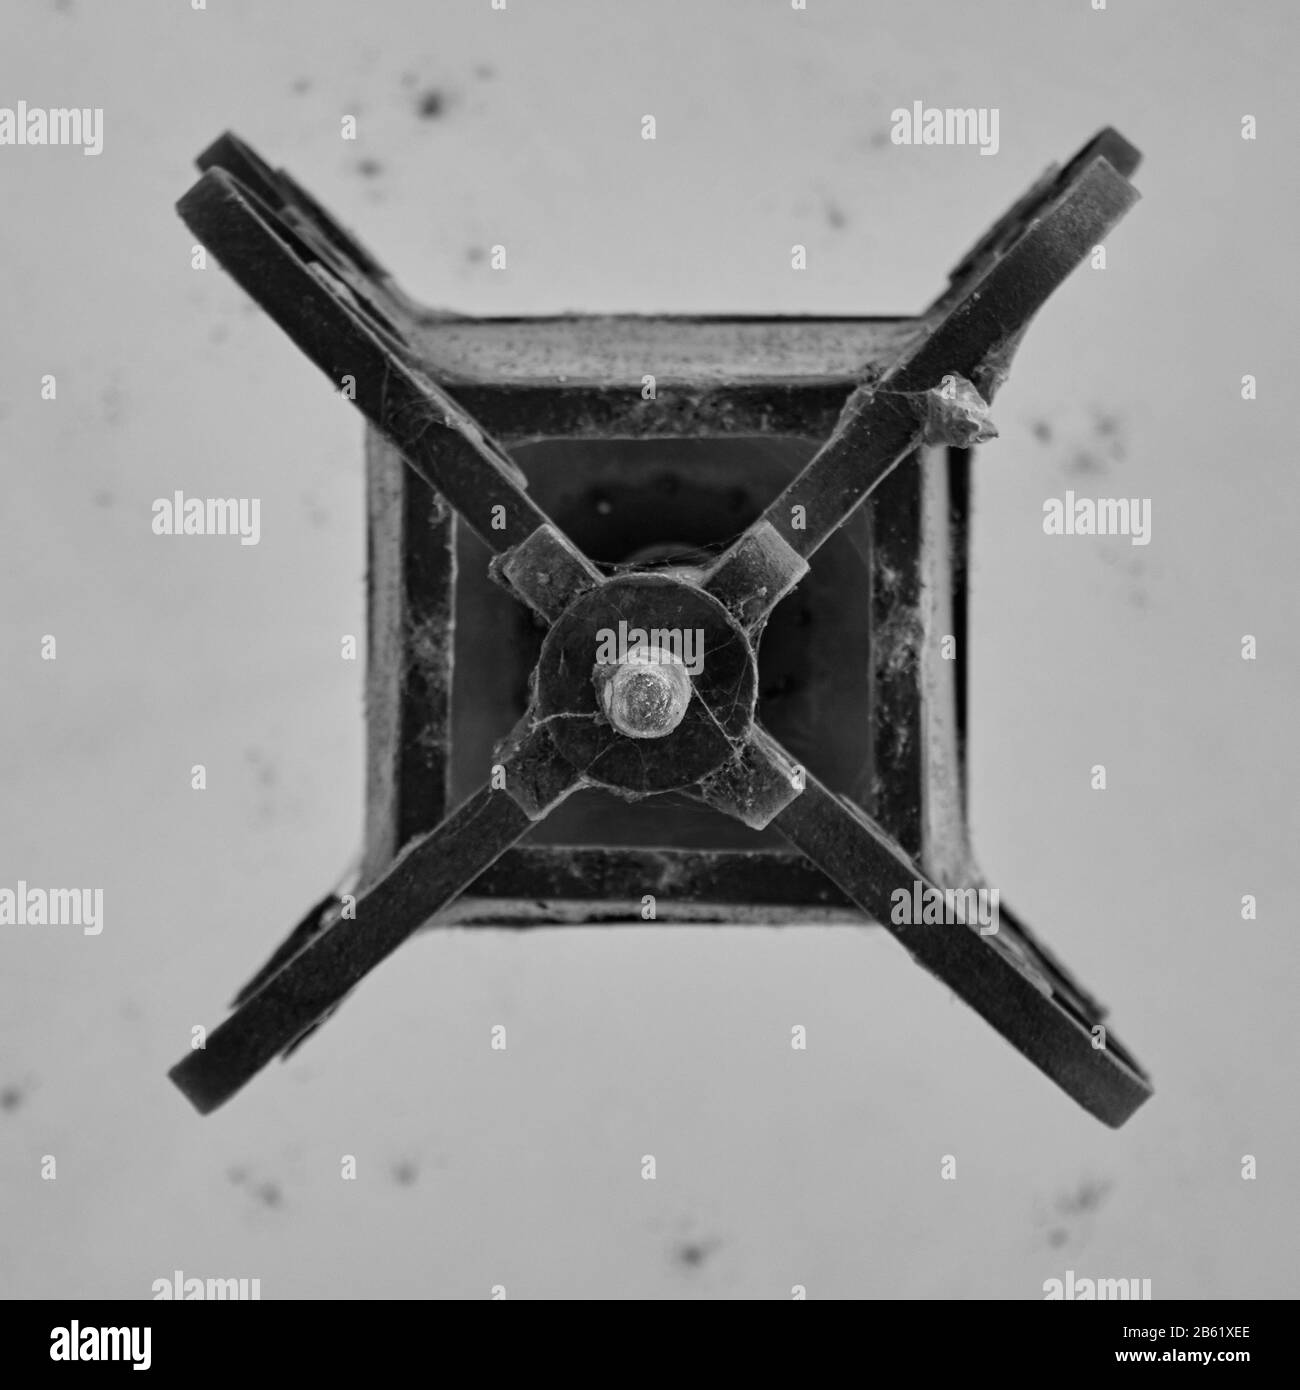 black and white detail of the bottom of old metal forged ceiling lantern Stock Photo